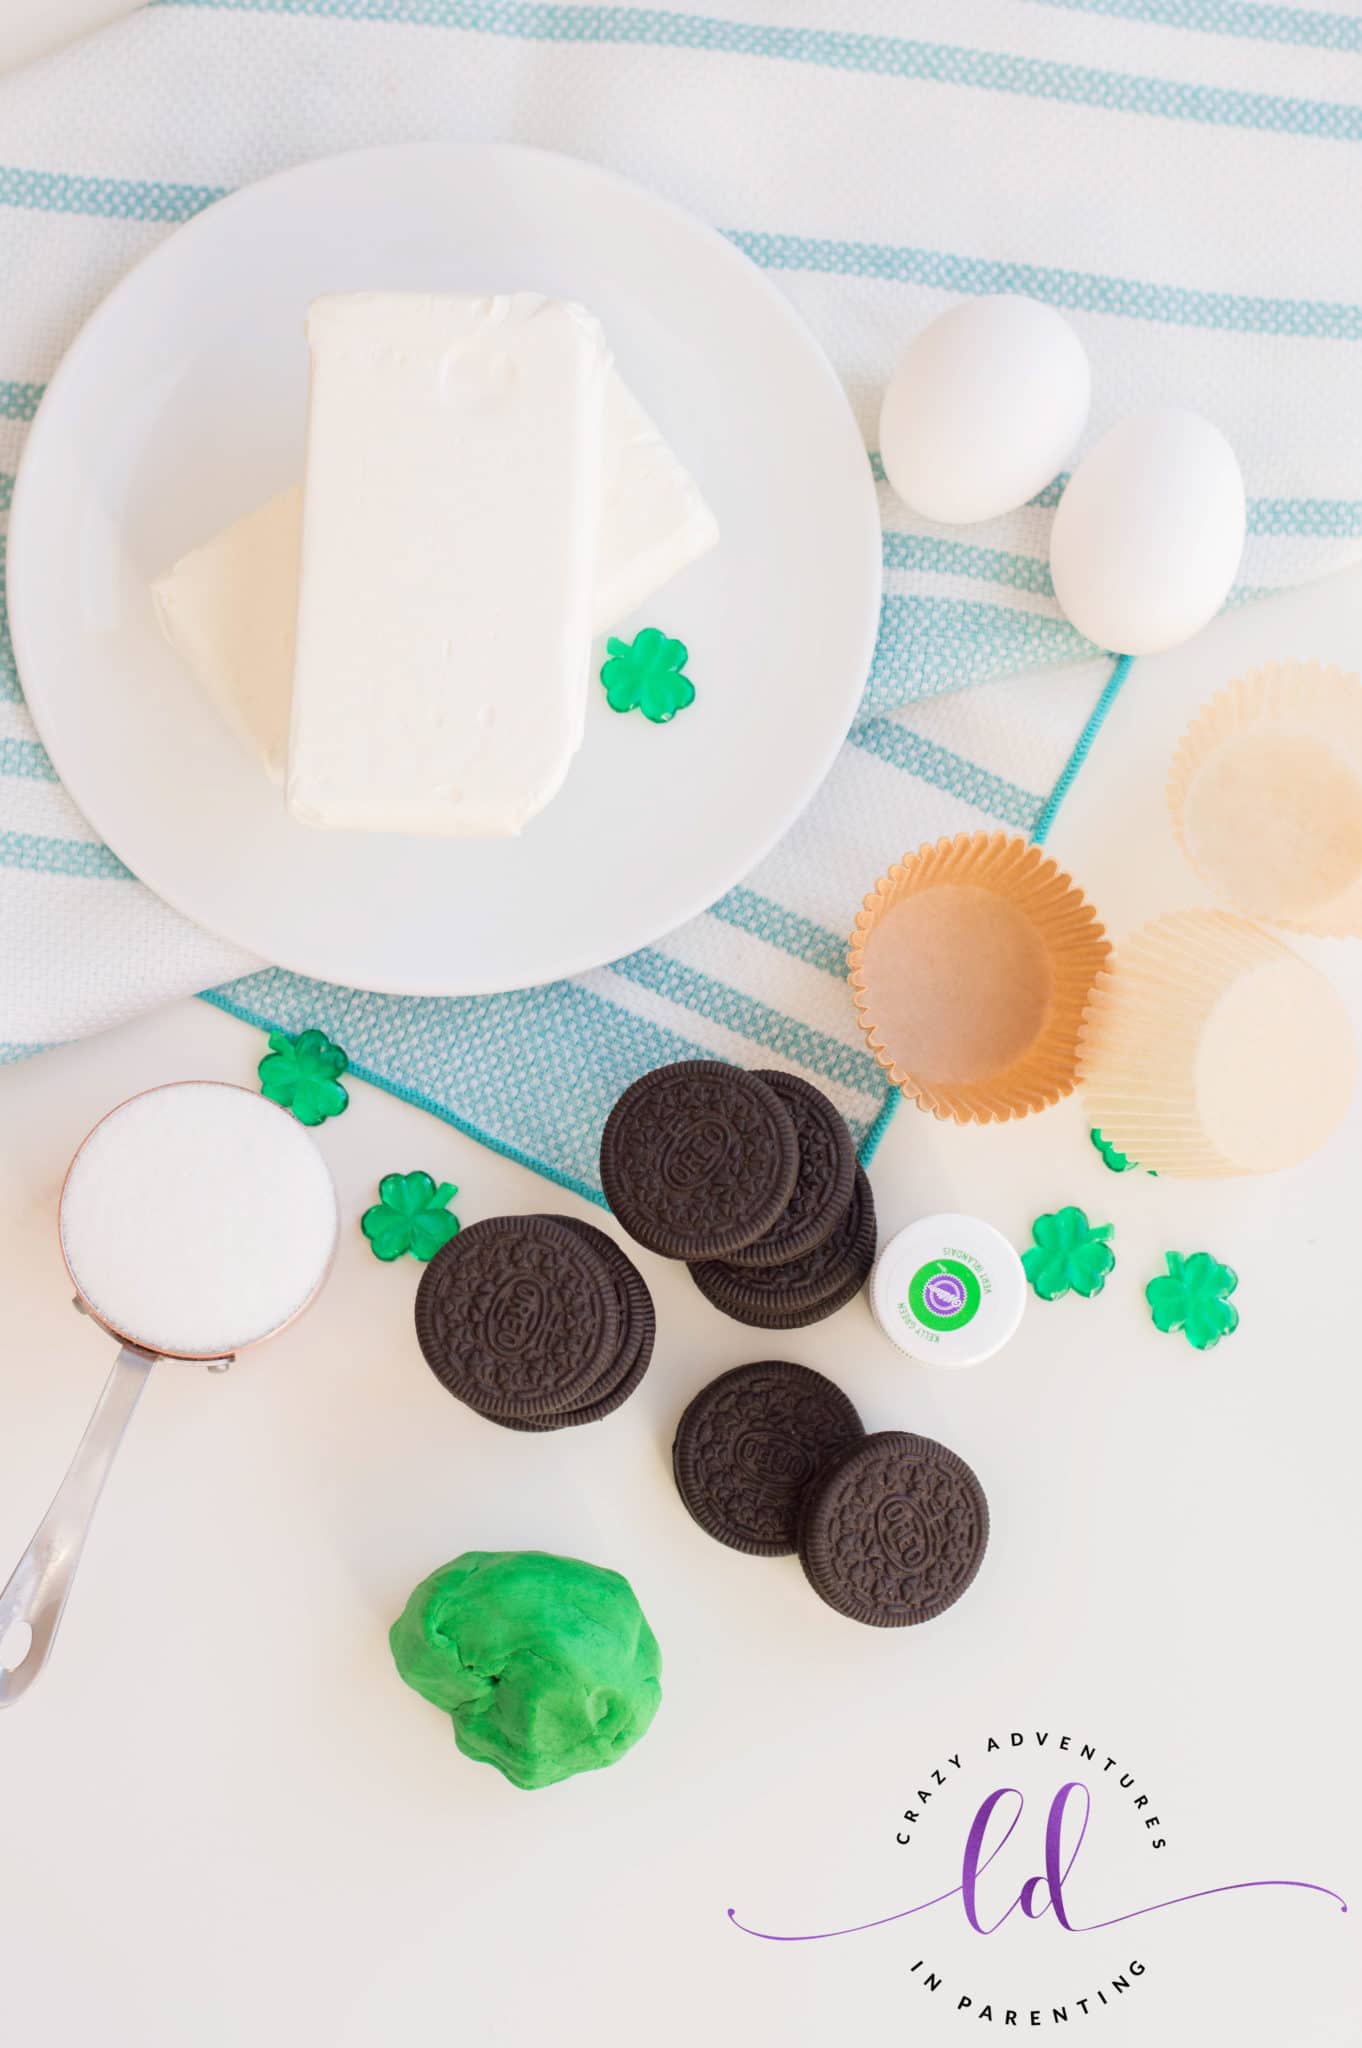 Ingredients Needed to Make St. Patrick's Day Mini Cheesecakes